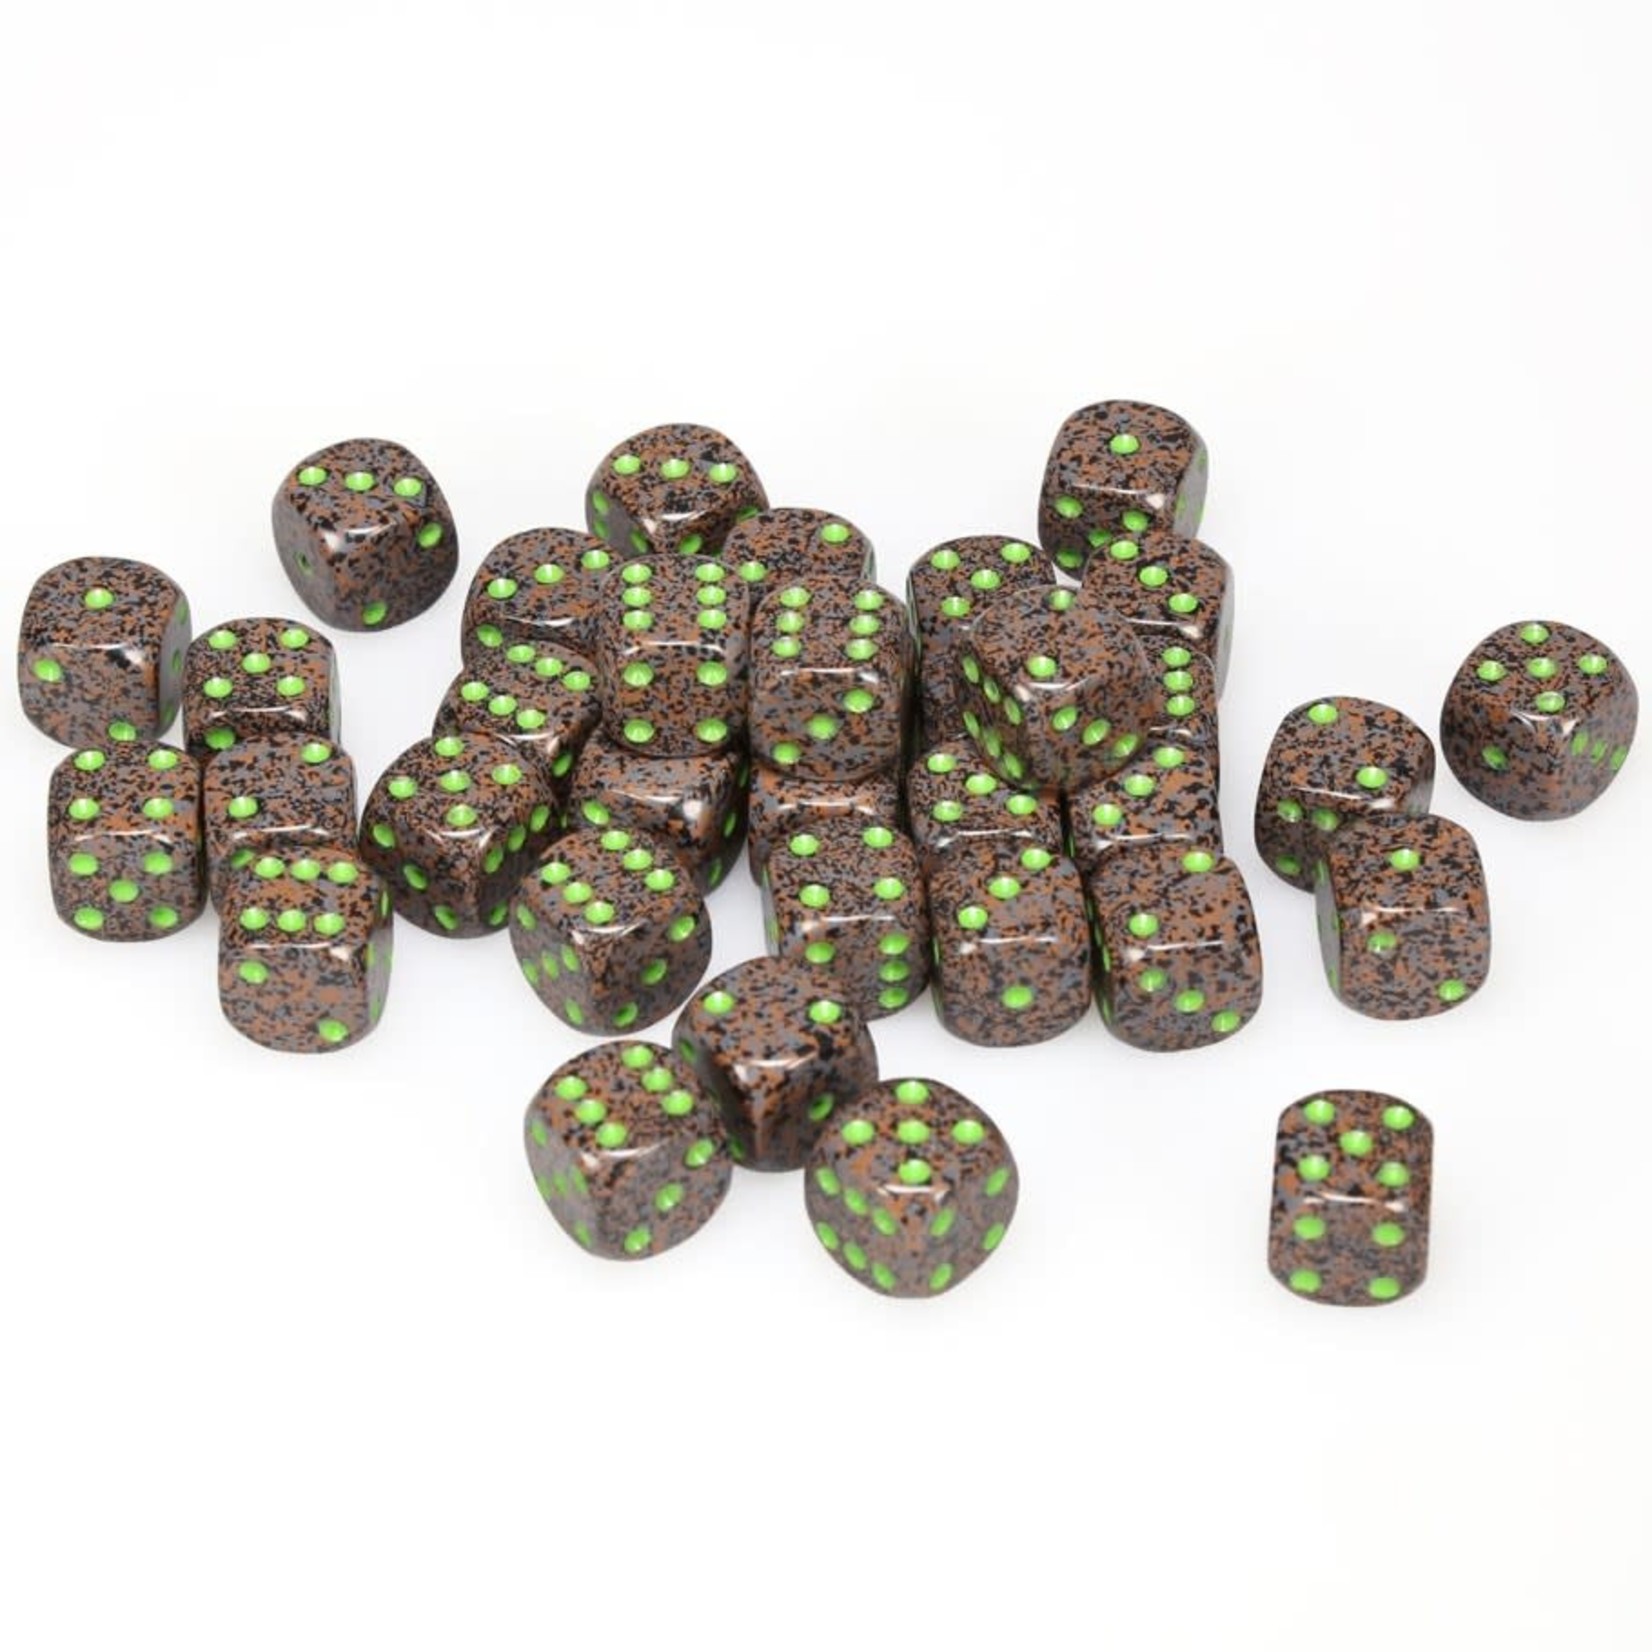 Chessex Chessex Speckled Earth 12 mm d6 36 die set